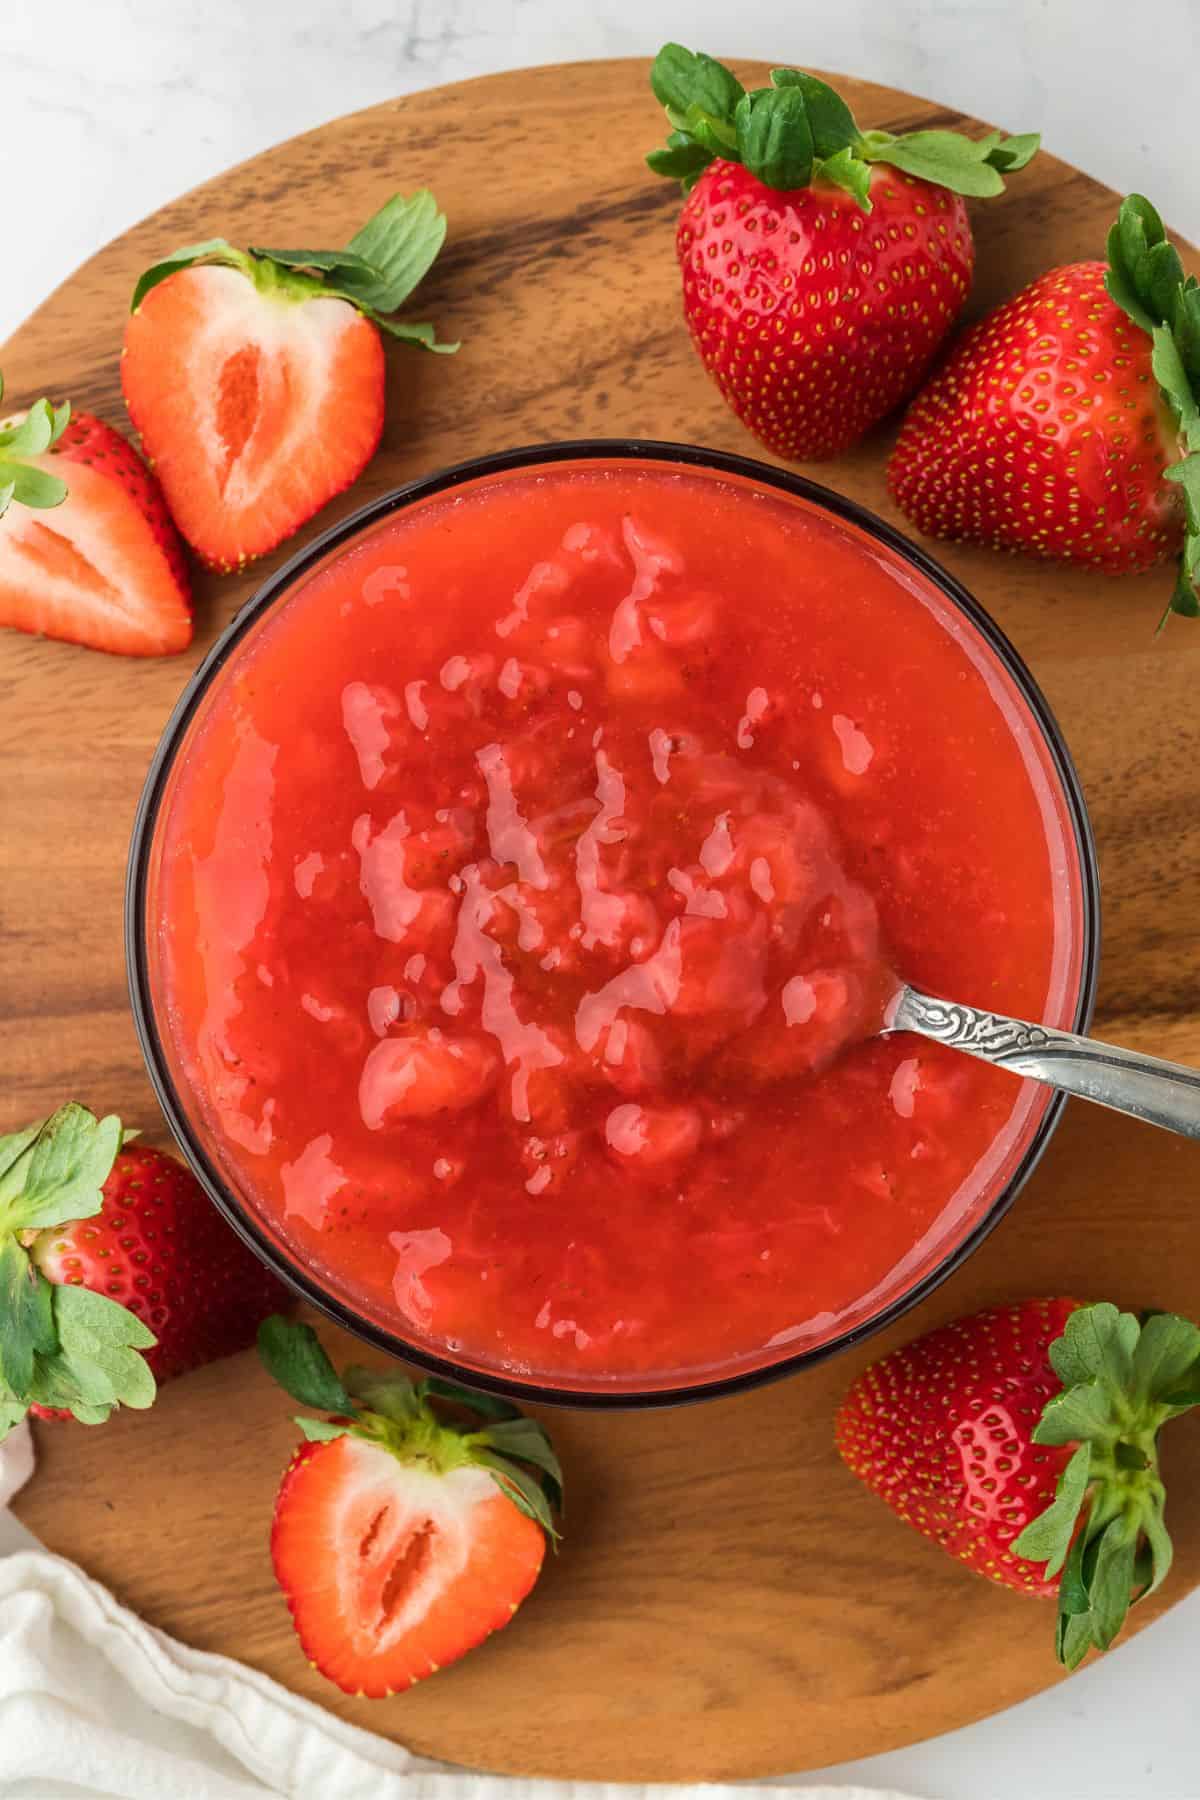 Overhead shot of a bowl of freshly made strawberry sauce in a wooden board with a spoon on it. Surrounding the bowl are several strawberries